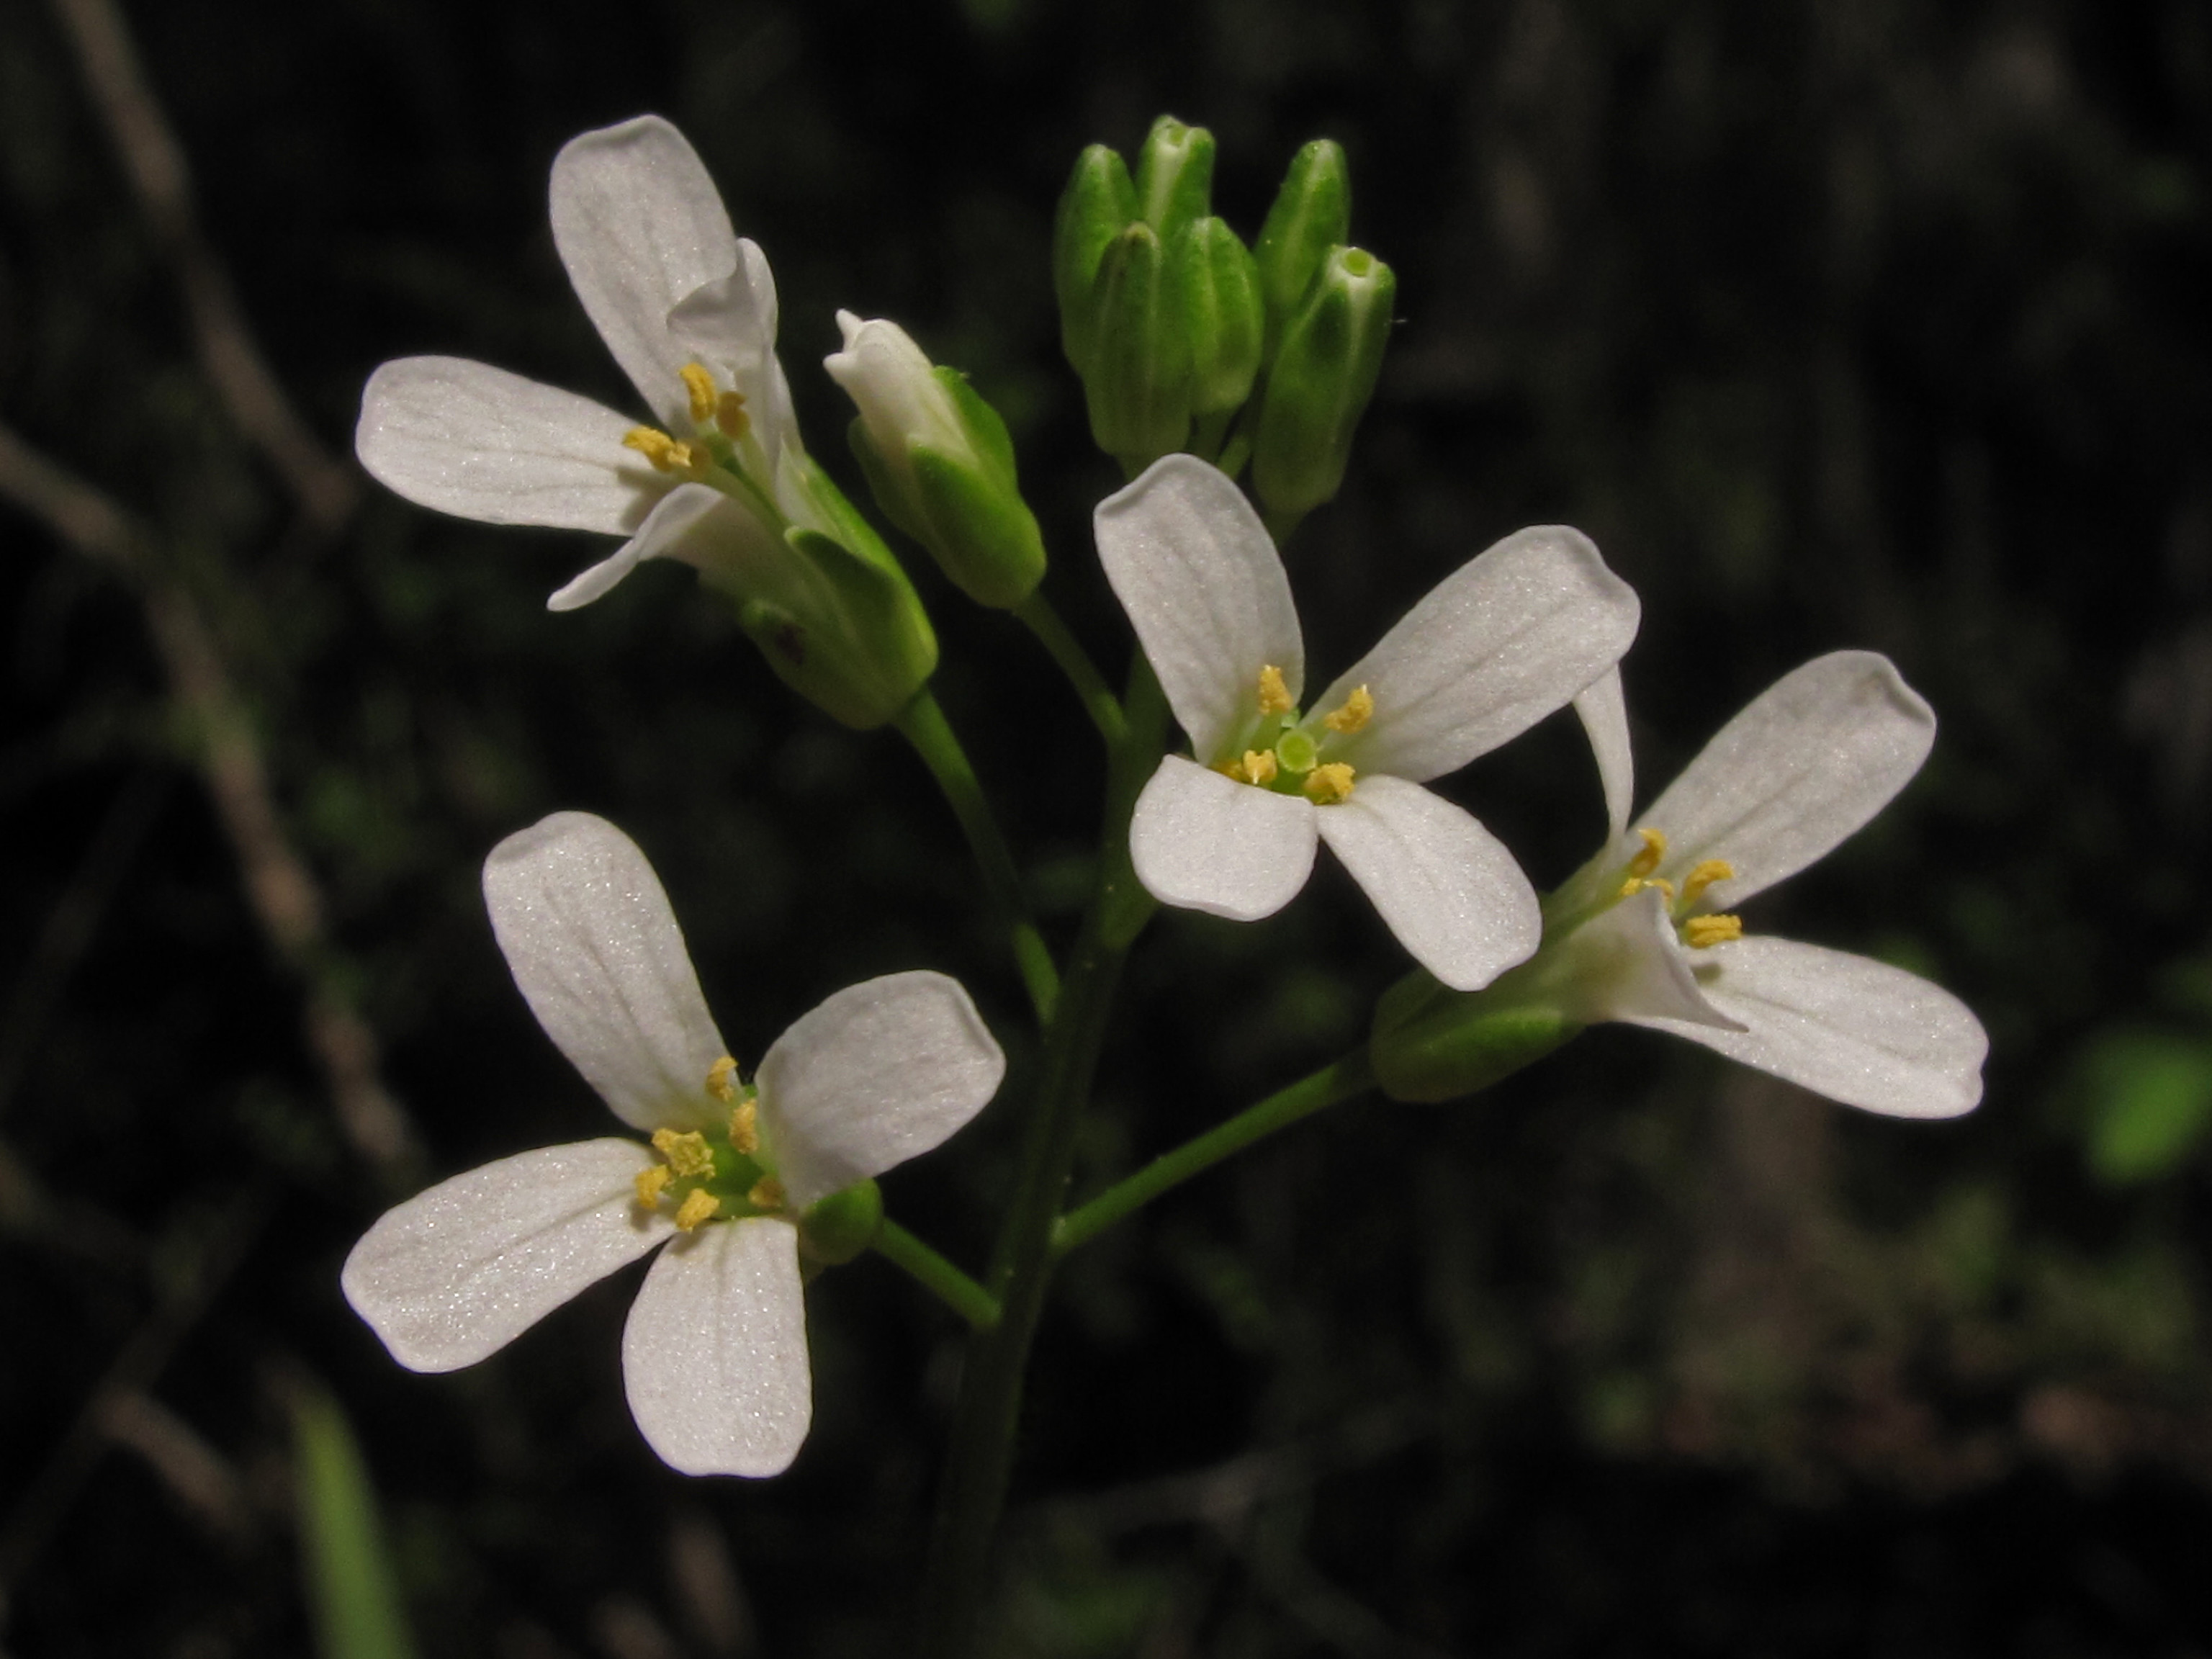 Small flowers with four white petals